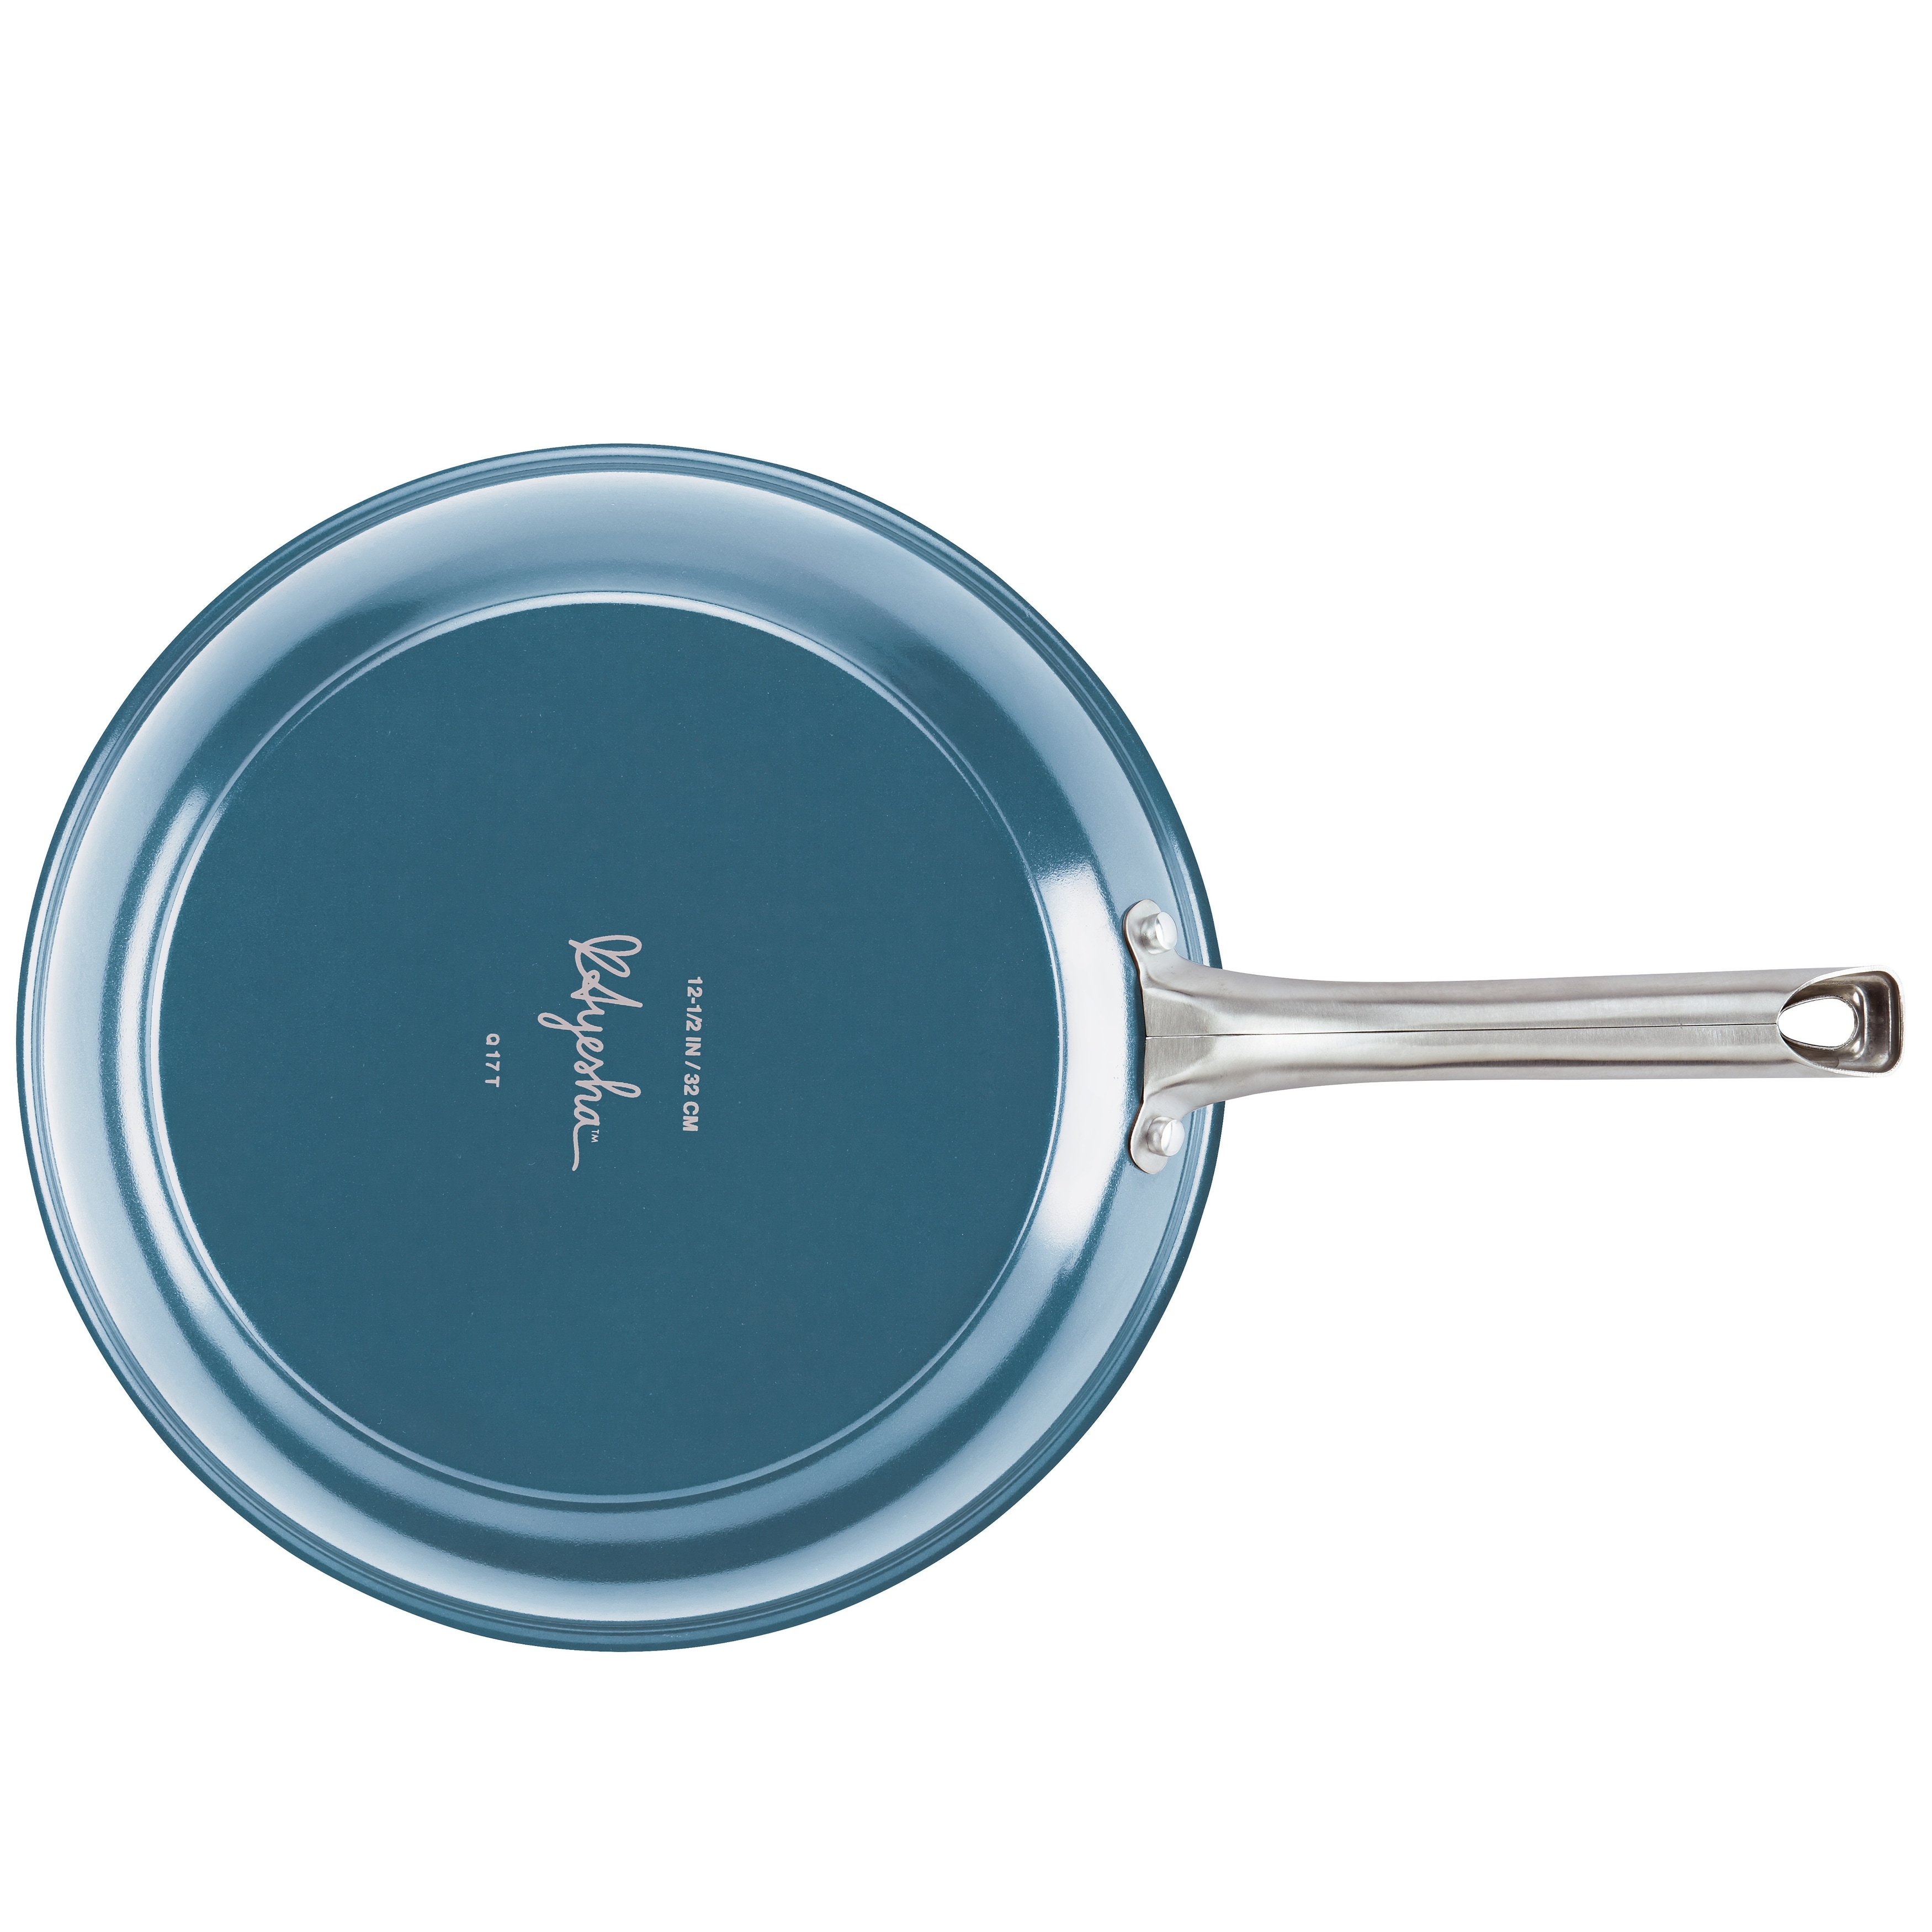 https://ak1.ostkcdn.com/images/products/is/images/direct/d0c713460388f710e05020d42edbcfd6520f74a0/Ayesha-Curry-Home-Collection-Porcelain-Enamel-Nonstick-Frying-Pan%2C-11.5-Inch%2C-Brown-Sugar.jpg